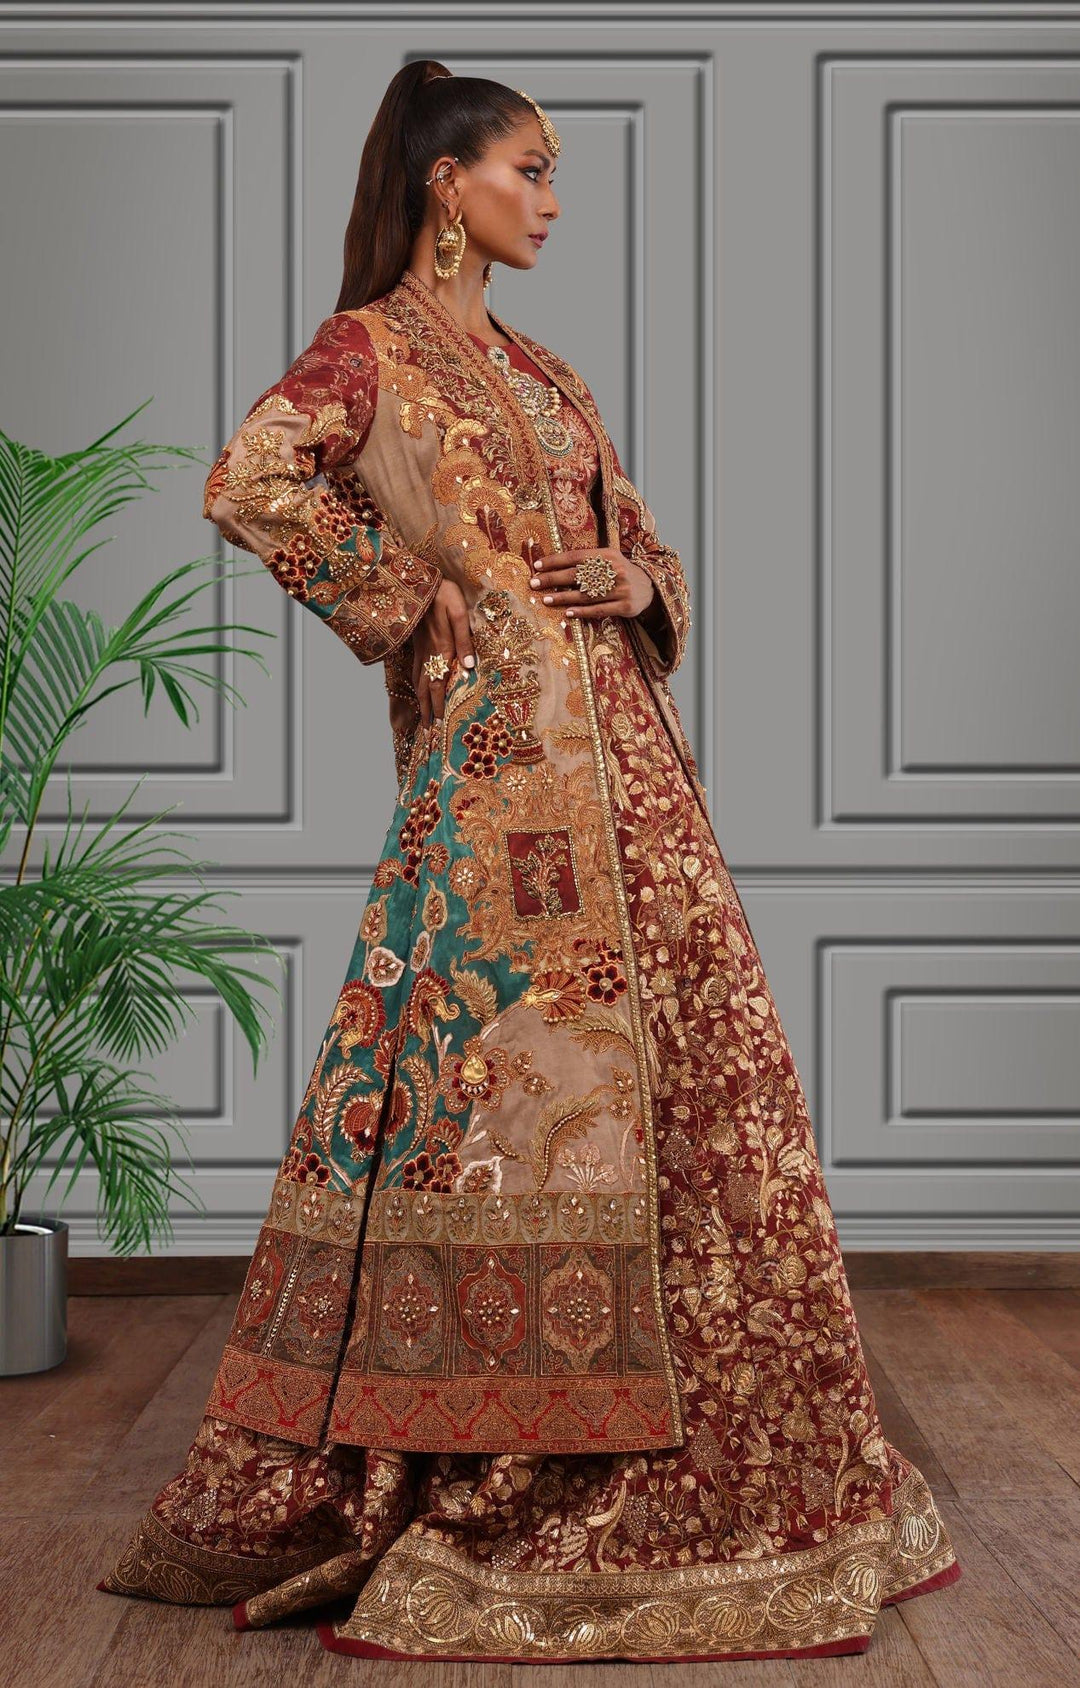 Shamaeel - Silk Embroidered Lehenga and Choli with Long Silk Embroidered Open Jacket - Studio by TCS